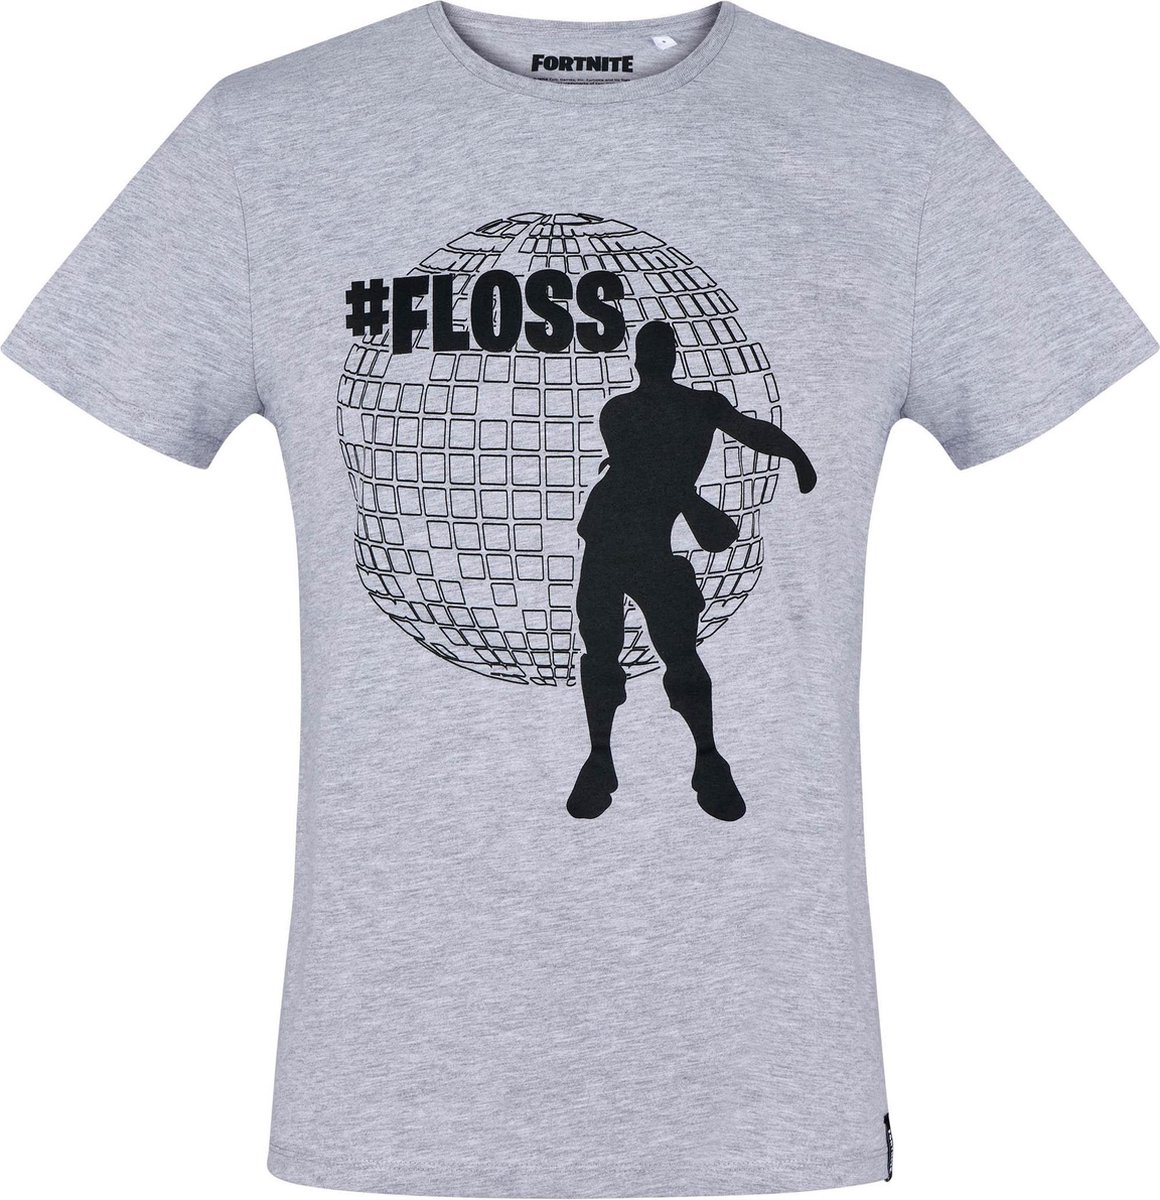 Hole in the Wall Fortnite - Floss Grey T-Shirt